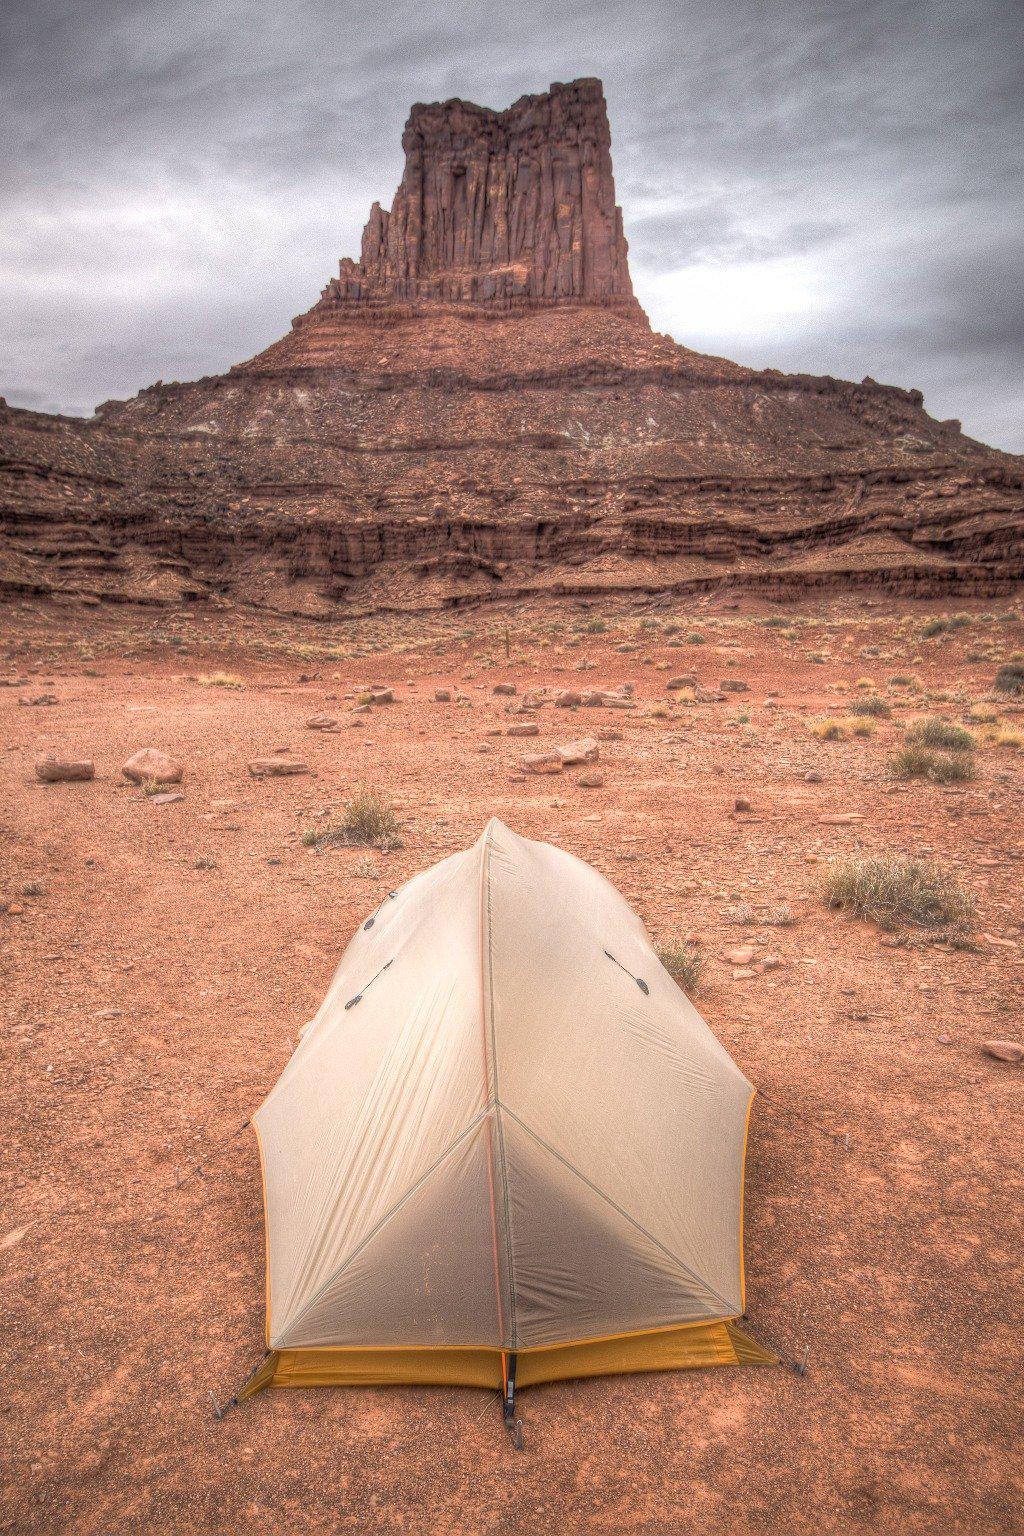 Fine photographic and art print of a small backpacker's tent in front of a red stone monument along Canyonlands National Park's White Rim Trail in Utah.